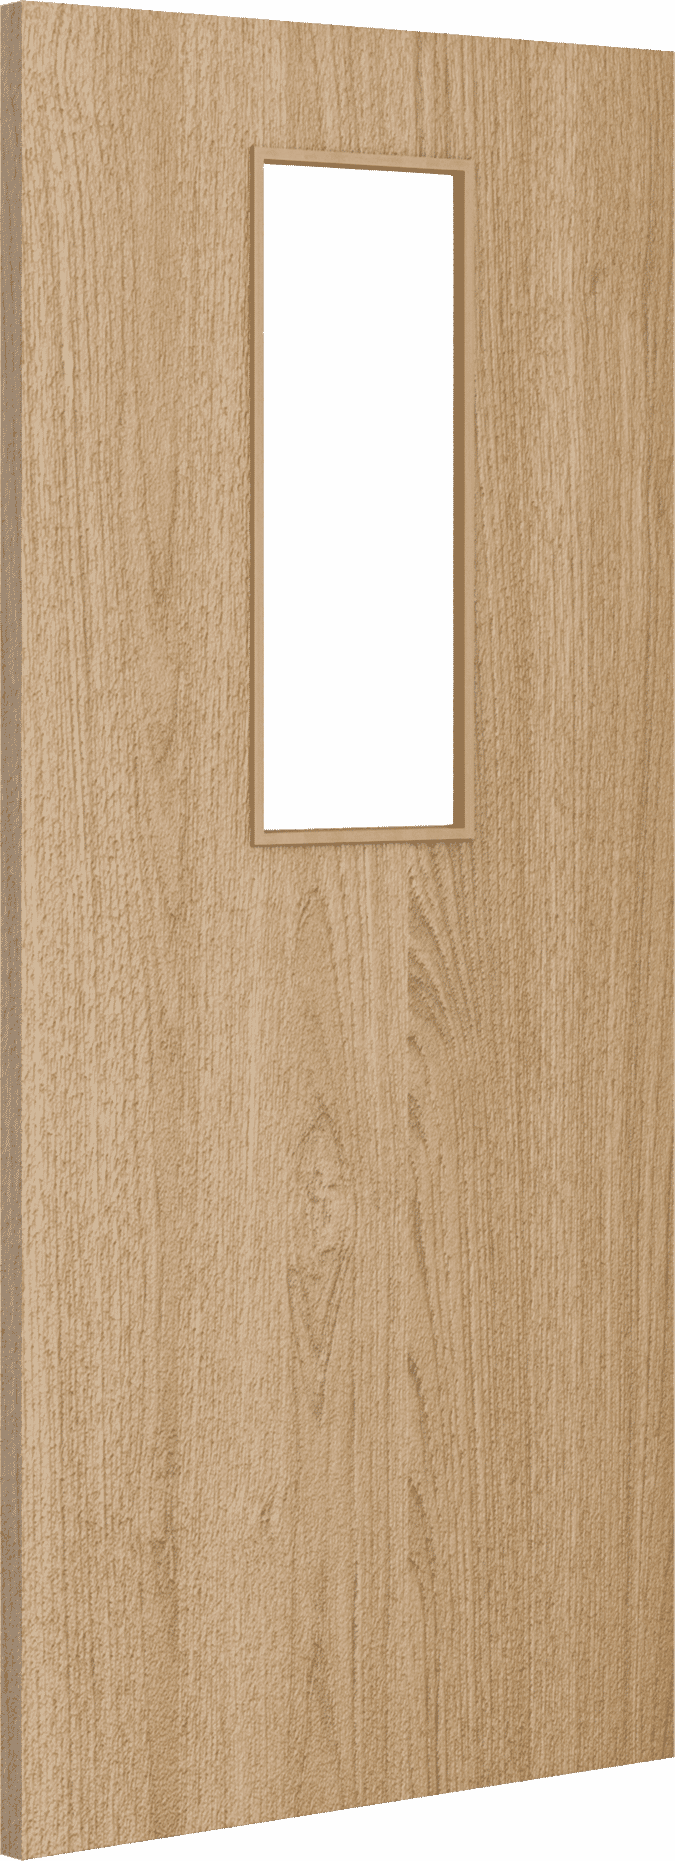 2040mm x 926mm x 44mm Architectural Oak 14 Clear Frosted - Prefinished FD30 Fire Door Blank